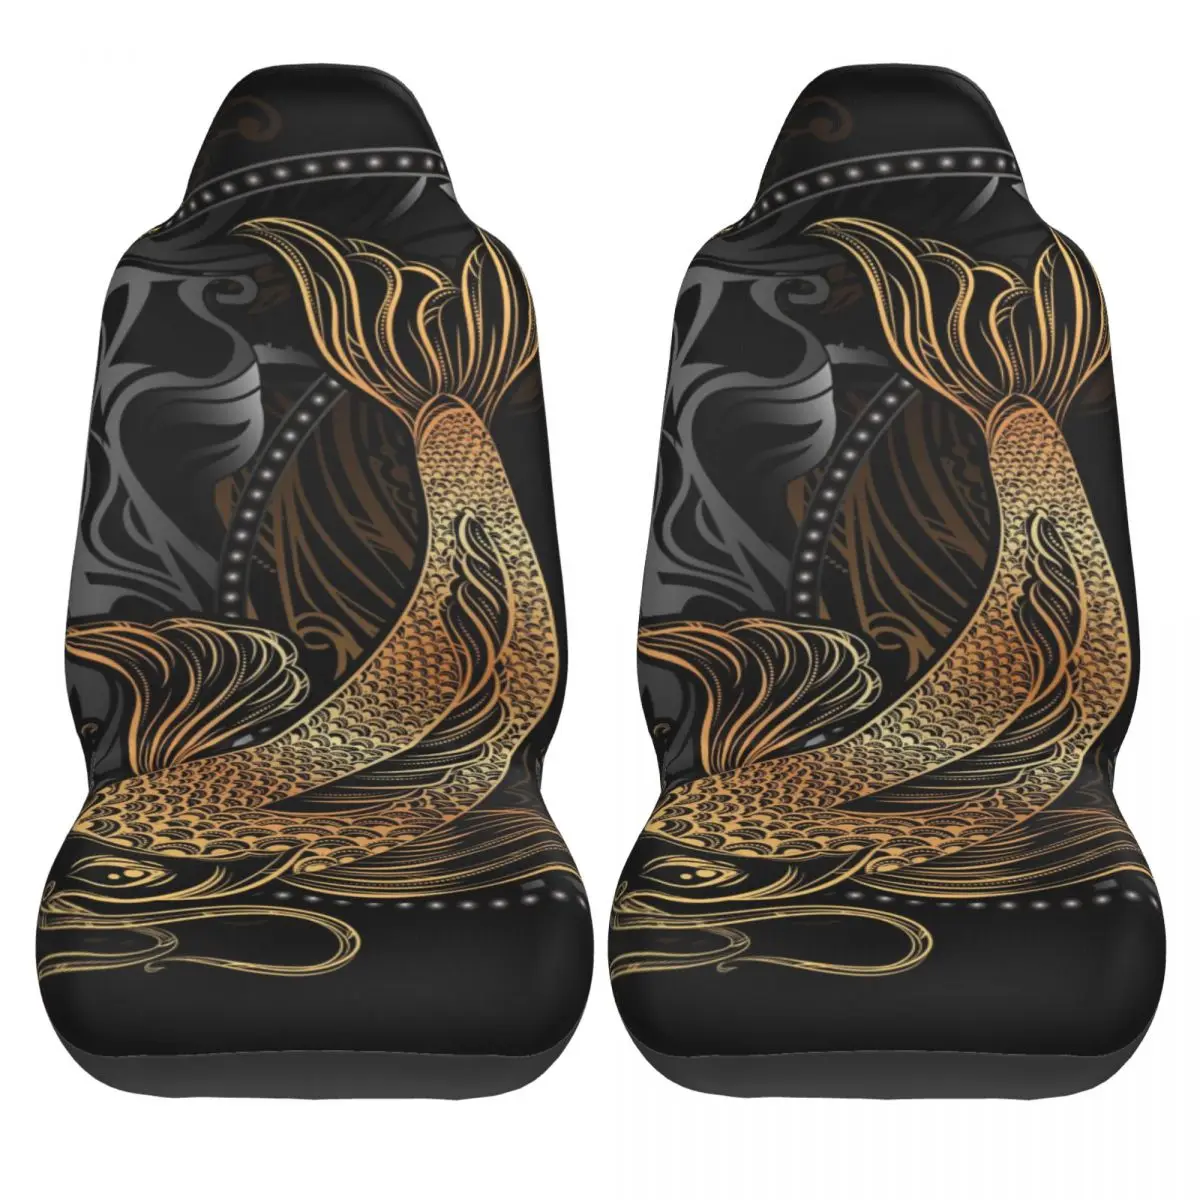 

2 pcs Car Seat Cover Bohemia Gold Koi Carp With Lotus And Florid Universal Wear Dirt-resistant Protector for Car Easy Cleaning